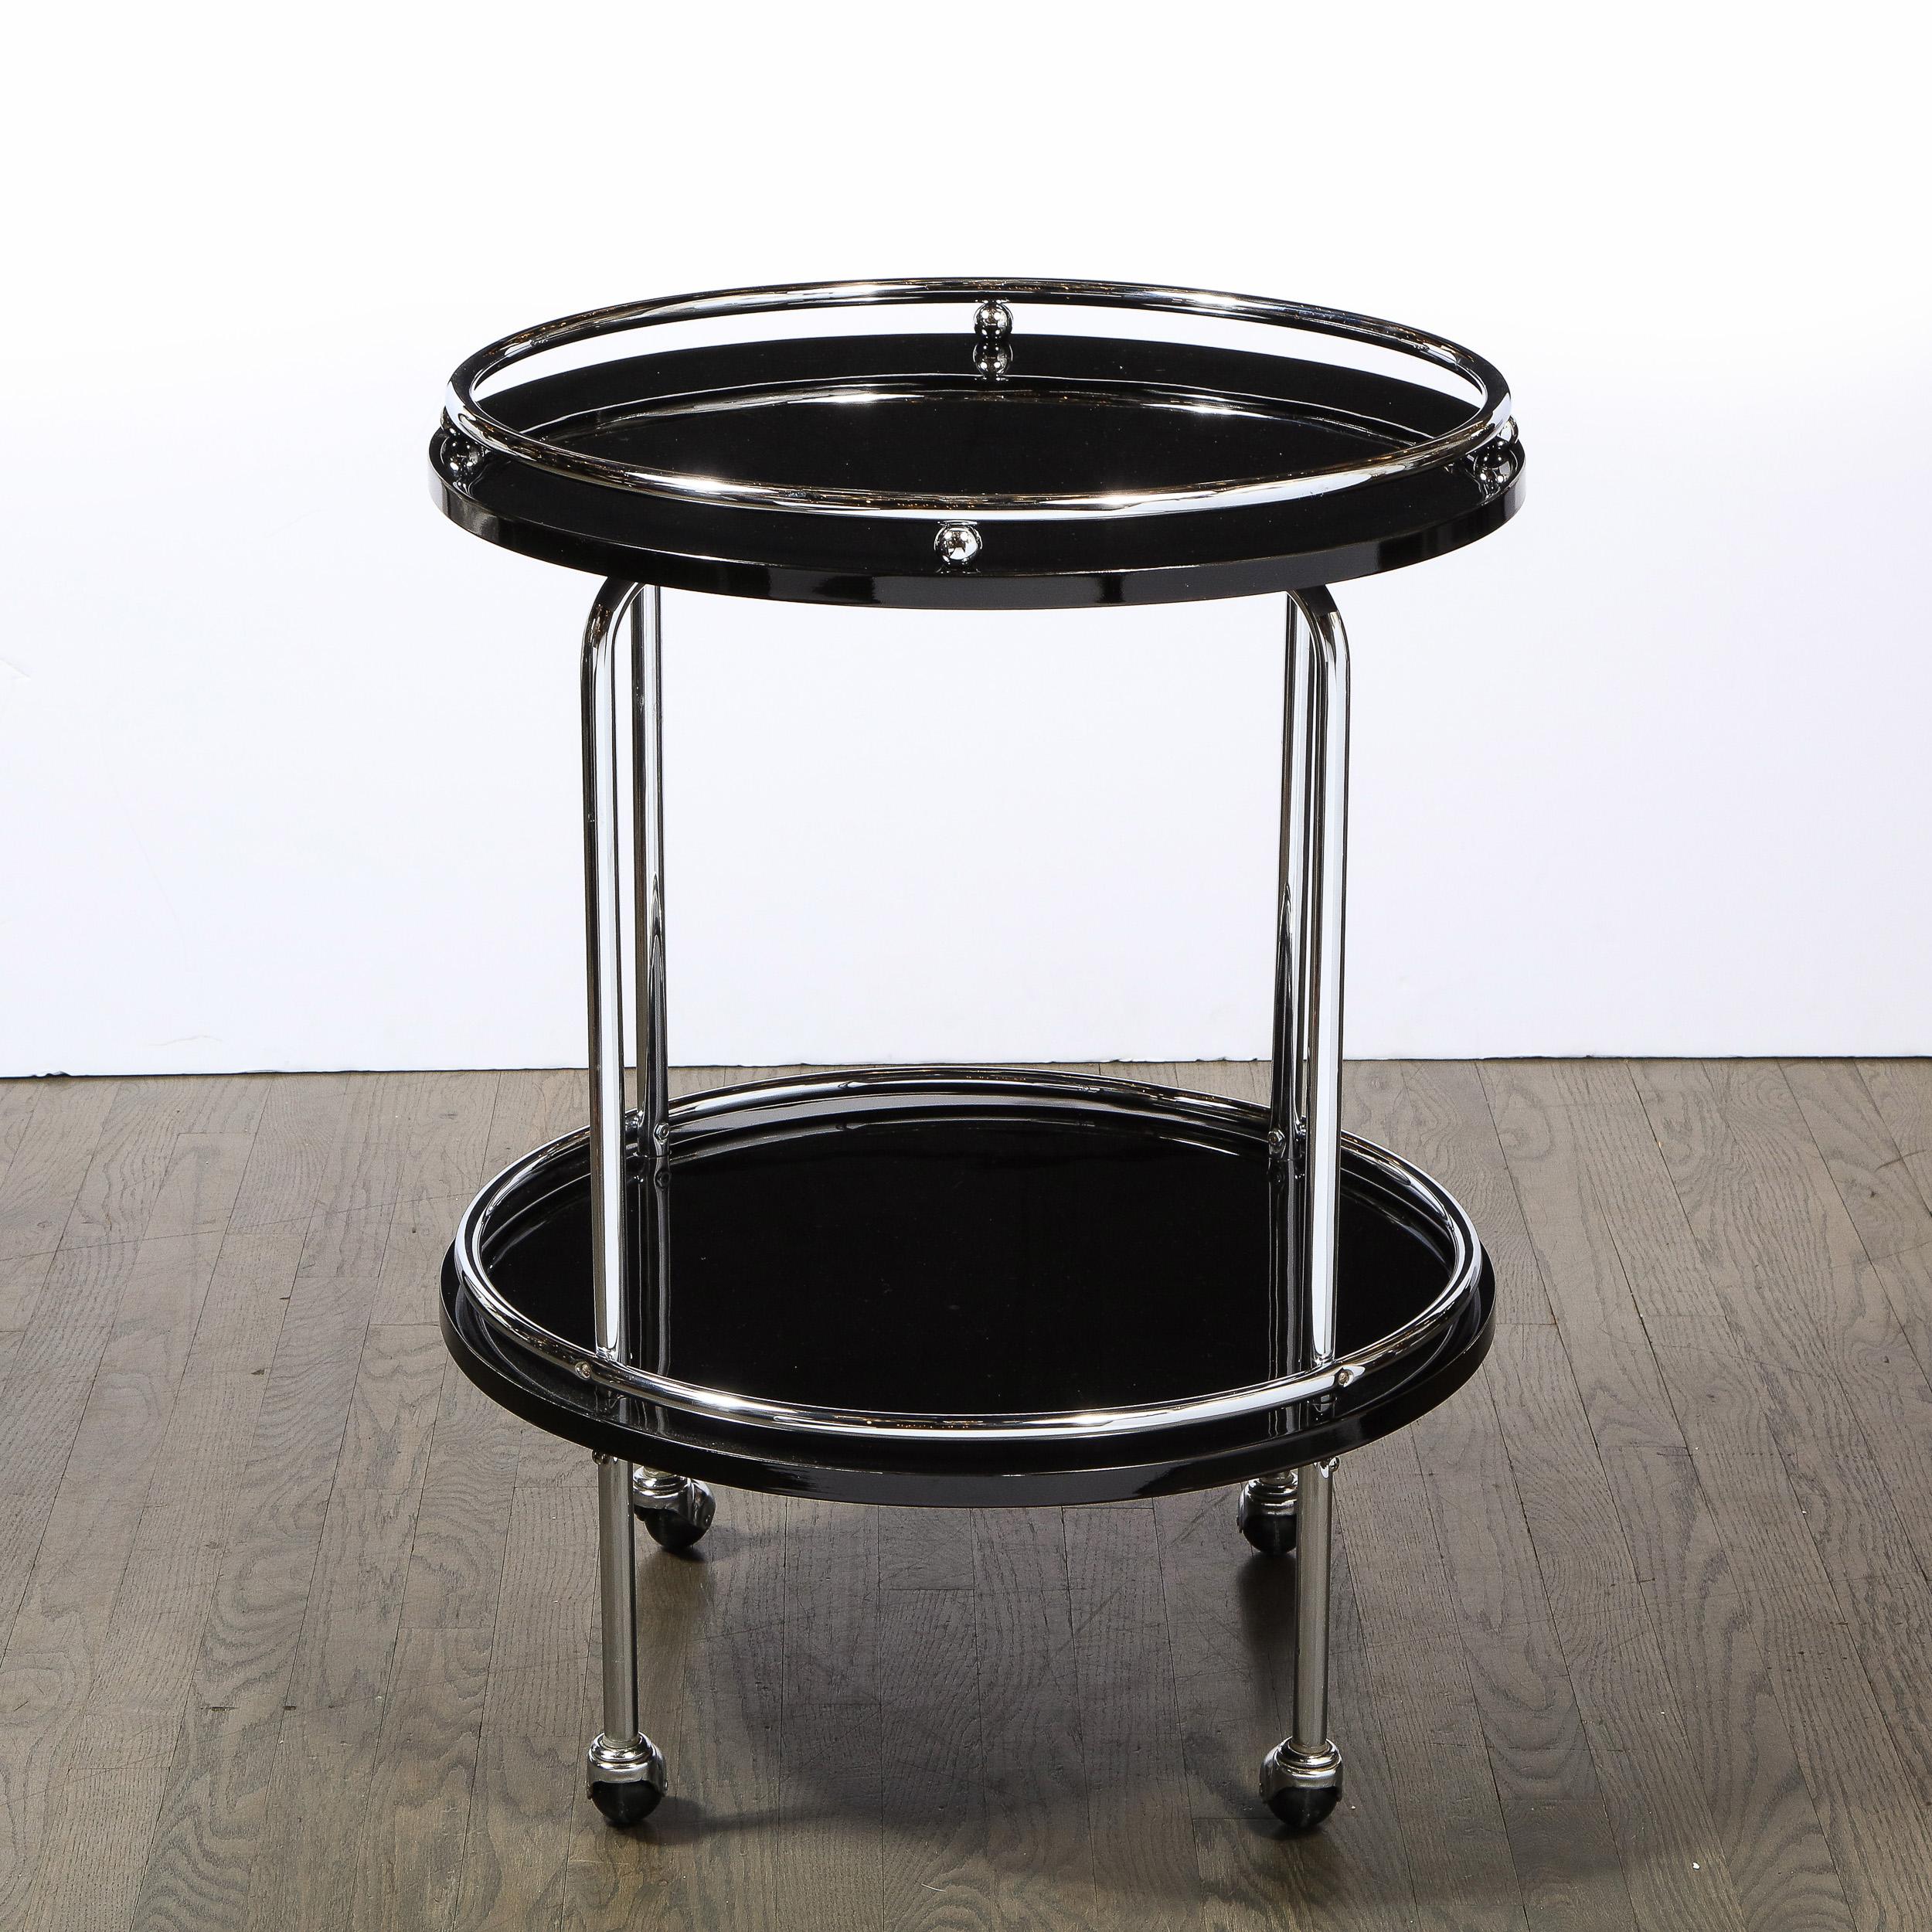 This stunning Art Deco Machine Age two tier bar/ serving cart was realized in the United States, circa 1935. Sitting on orbital castors, the piece features a polished chrome body consisting of four streamlined supports that connect two circular tops